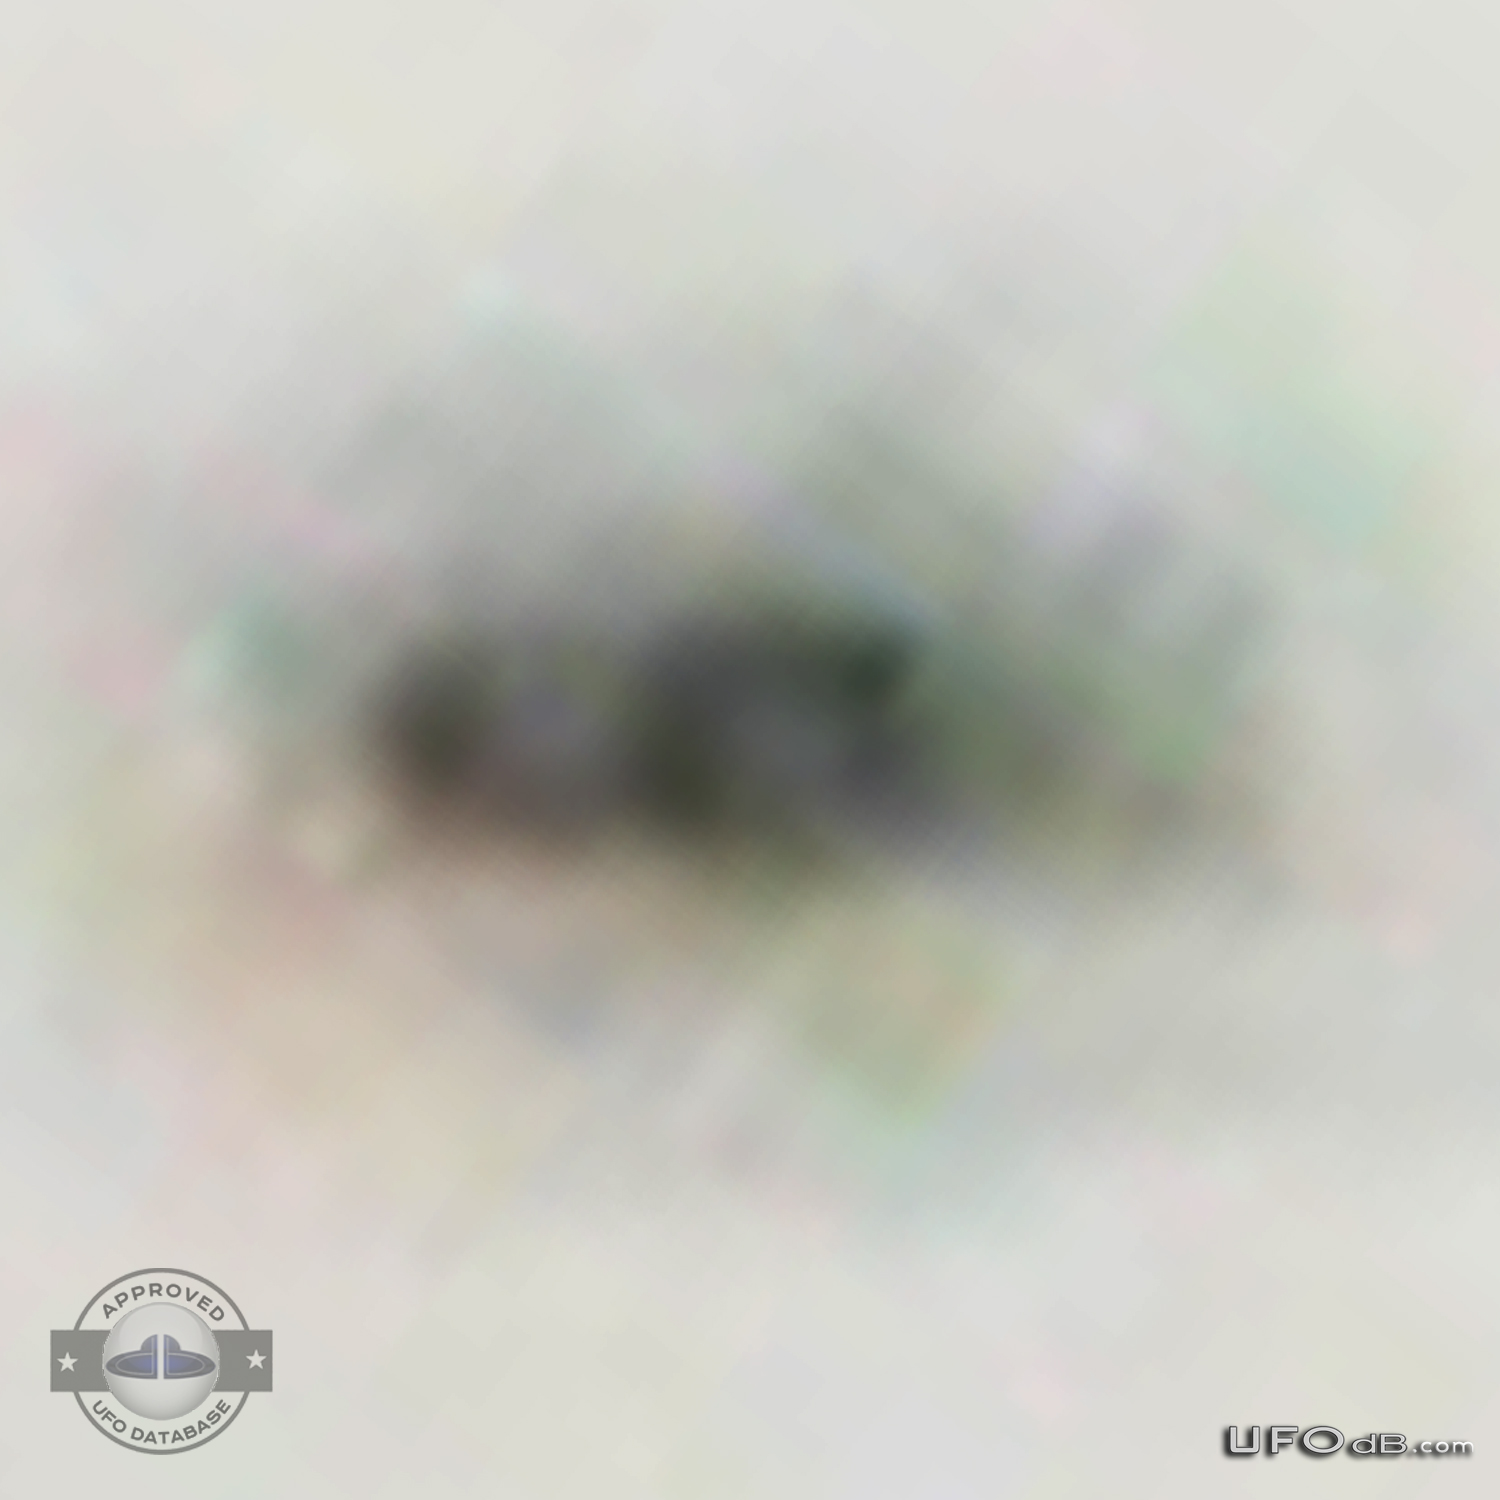 While looking at planes a Man see a UFO - Cauca, Colombia - March 2011 UFO Picture #280-7